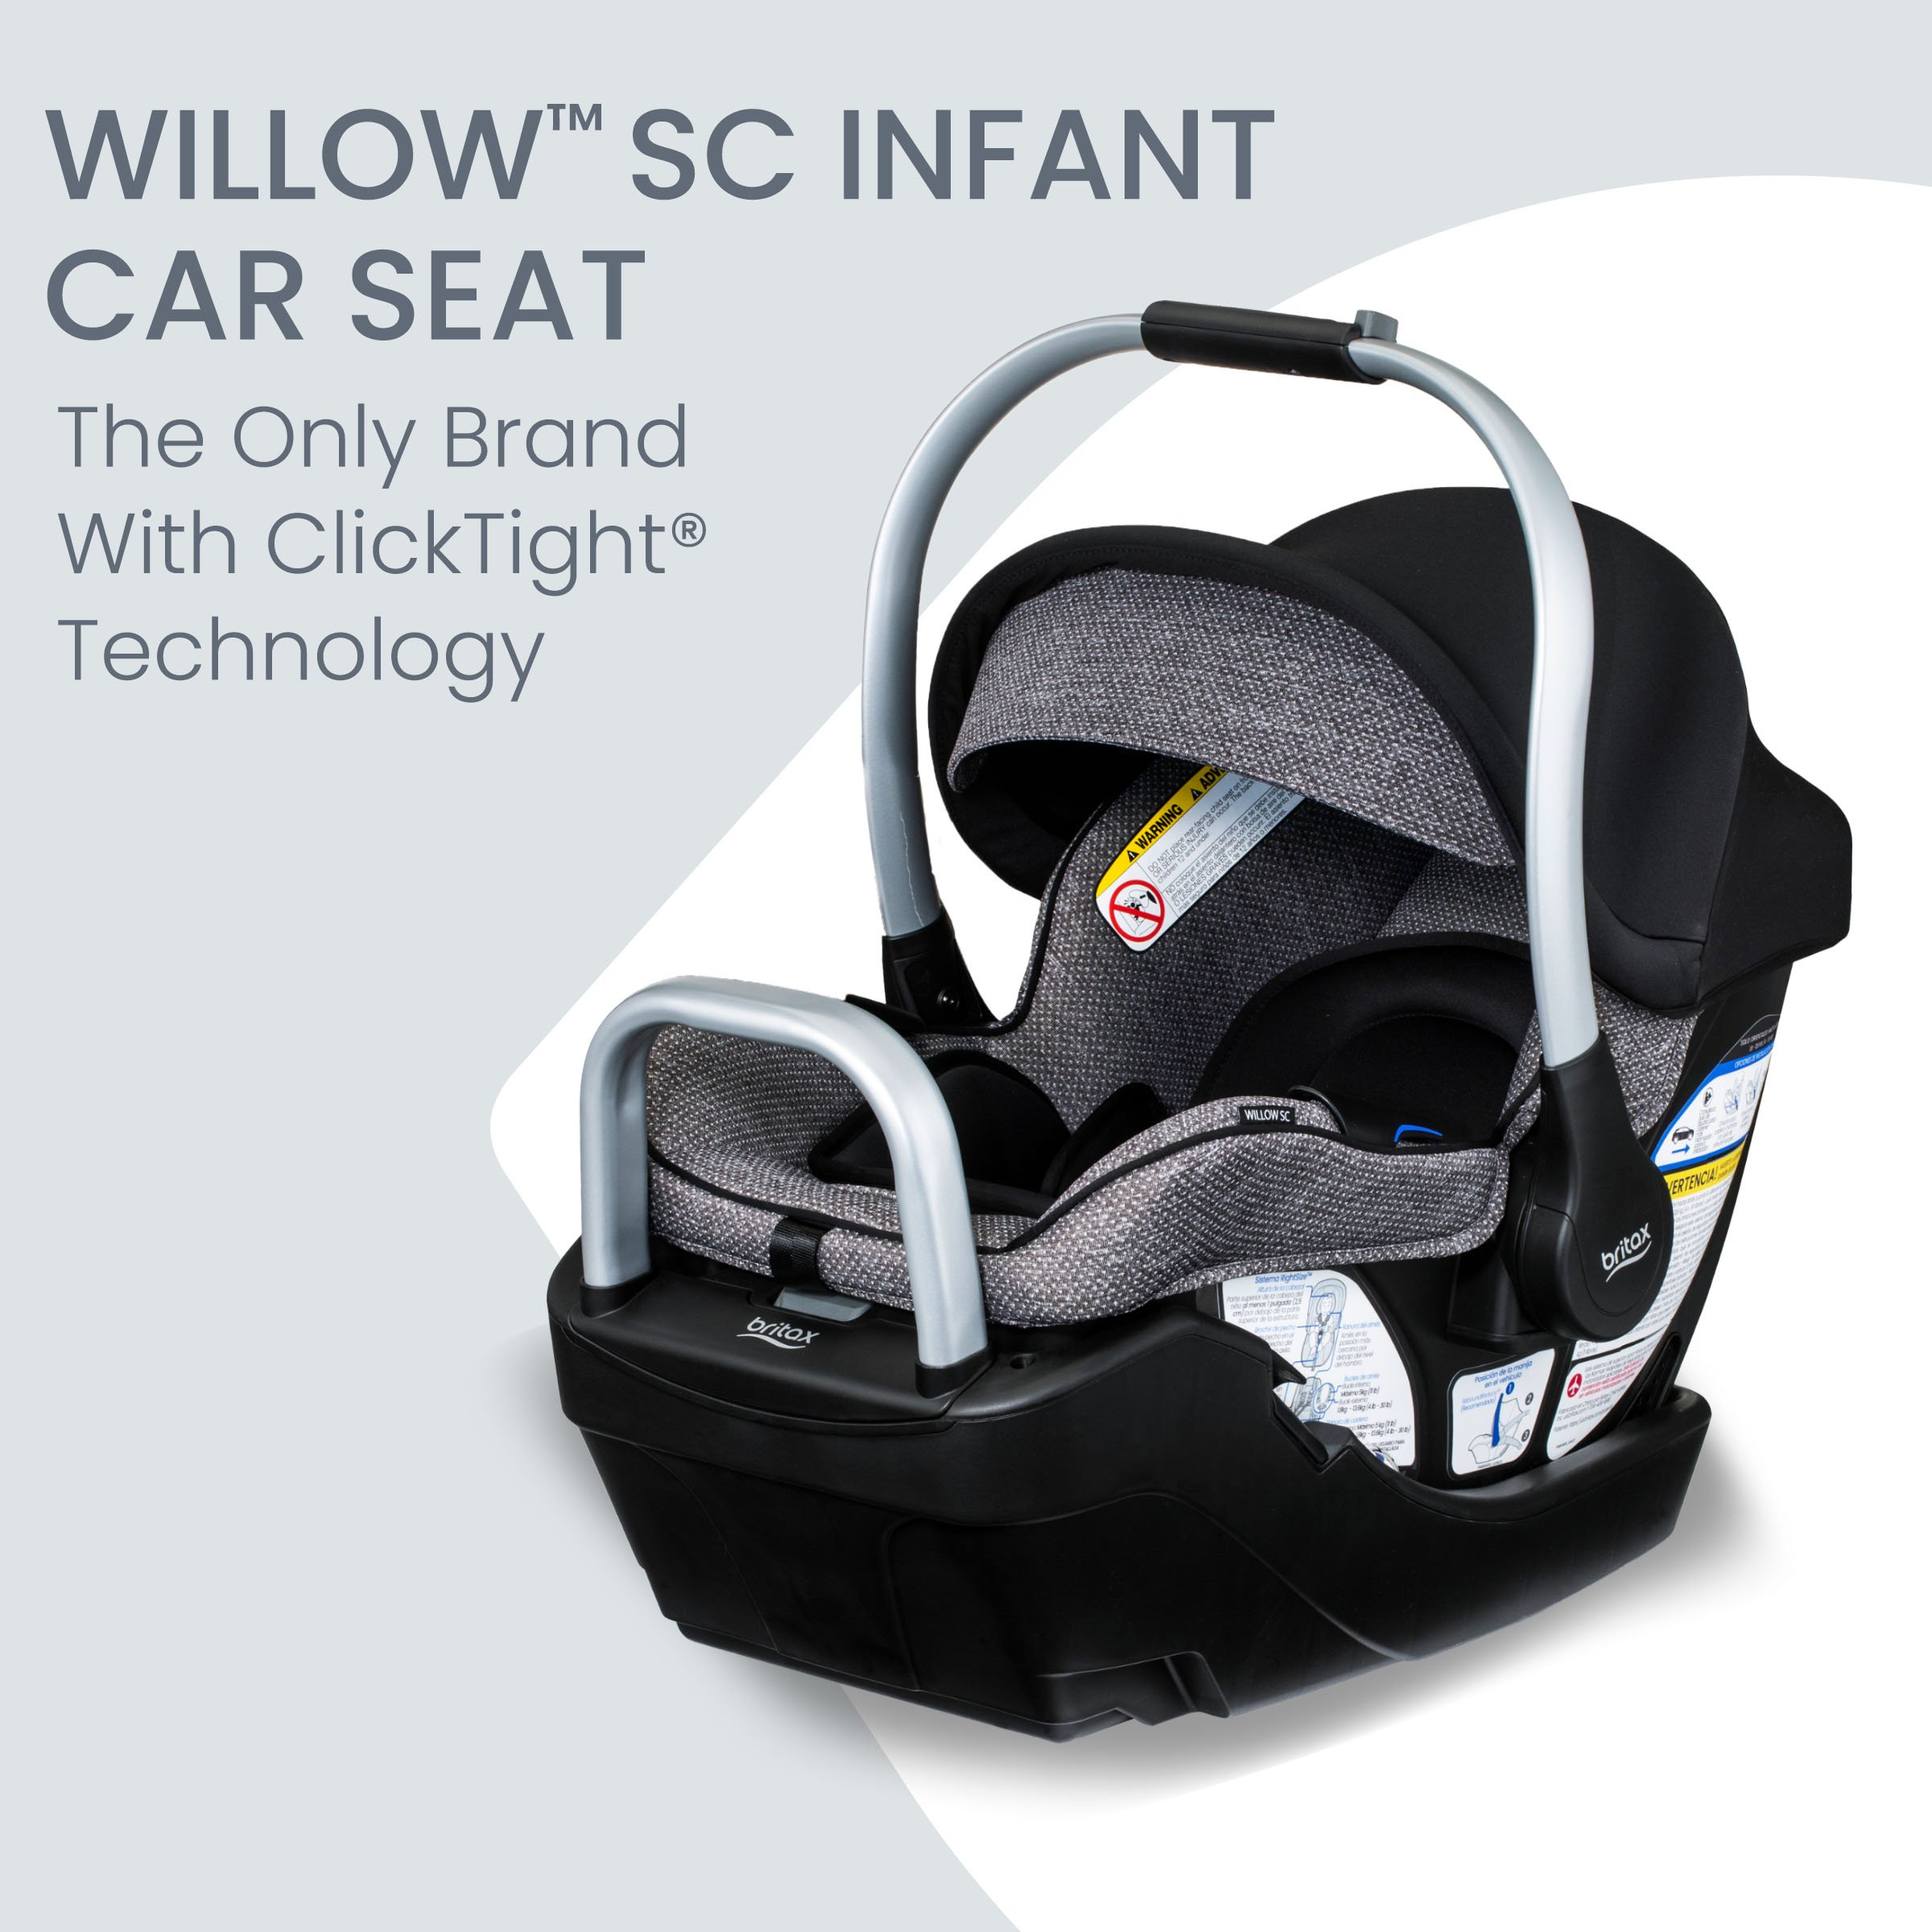 Willow SC Infant Car Seat the Only Brand with ClickTight Technology